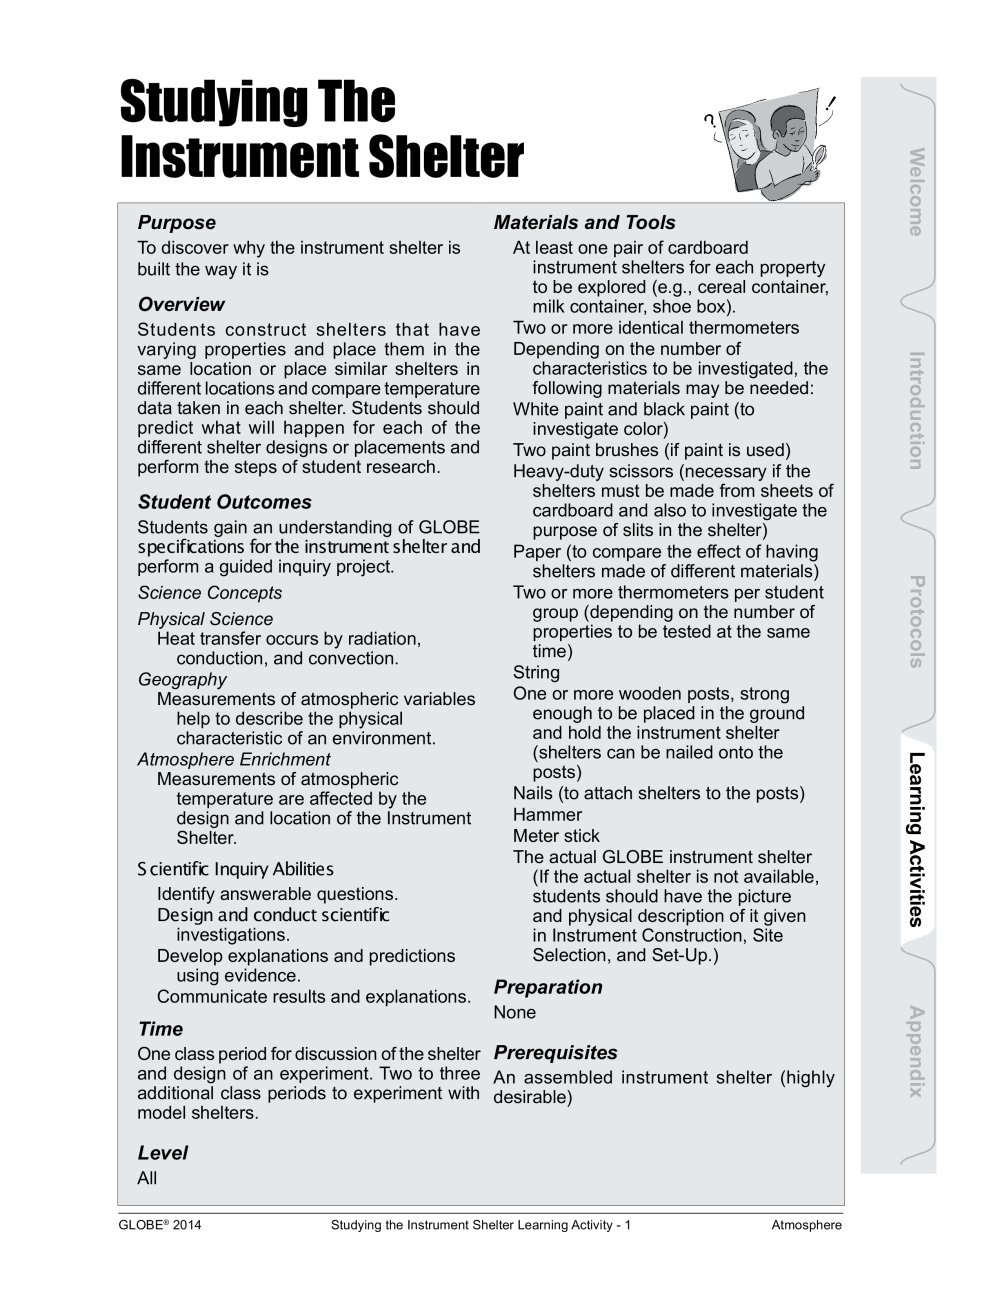 Learning Activities preview for Studying The Instrument Shelter